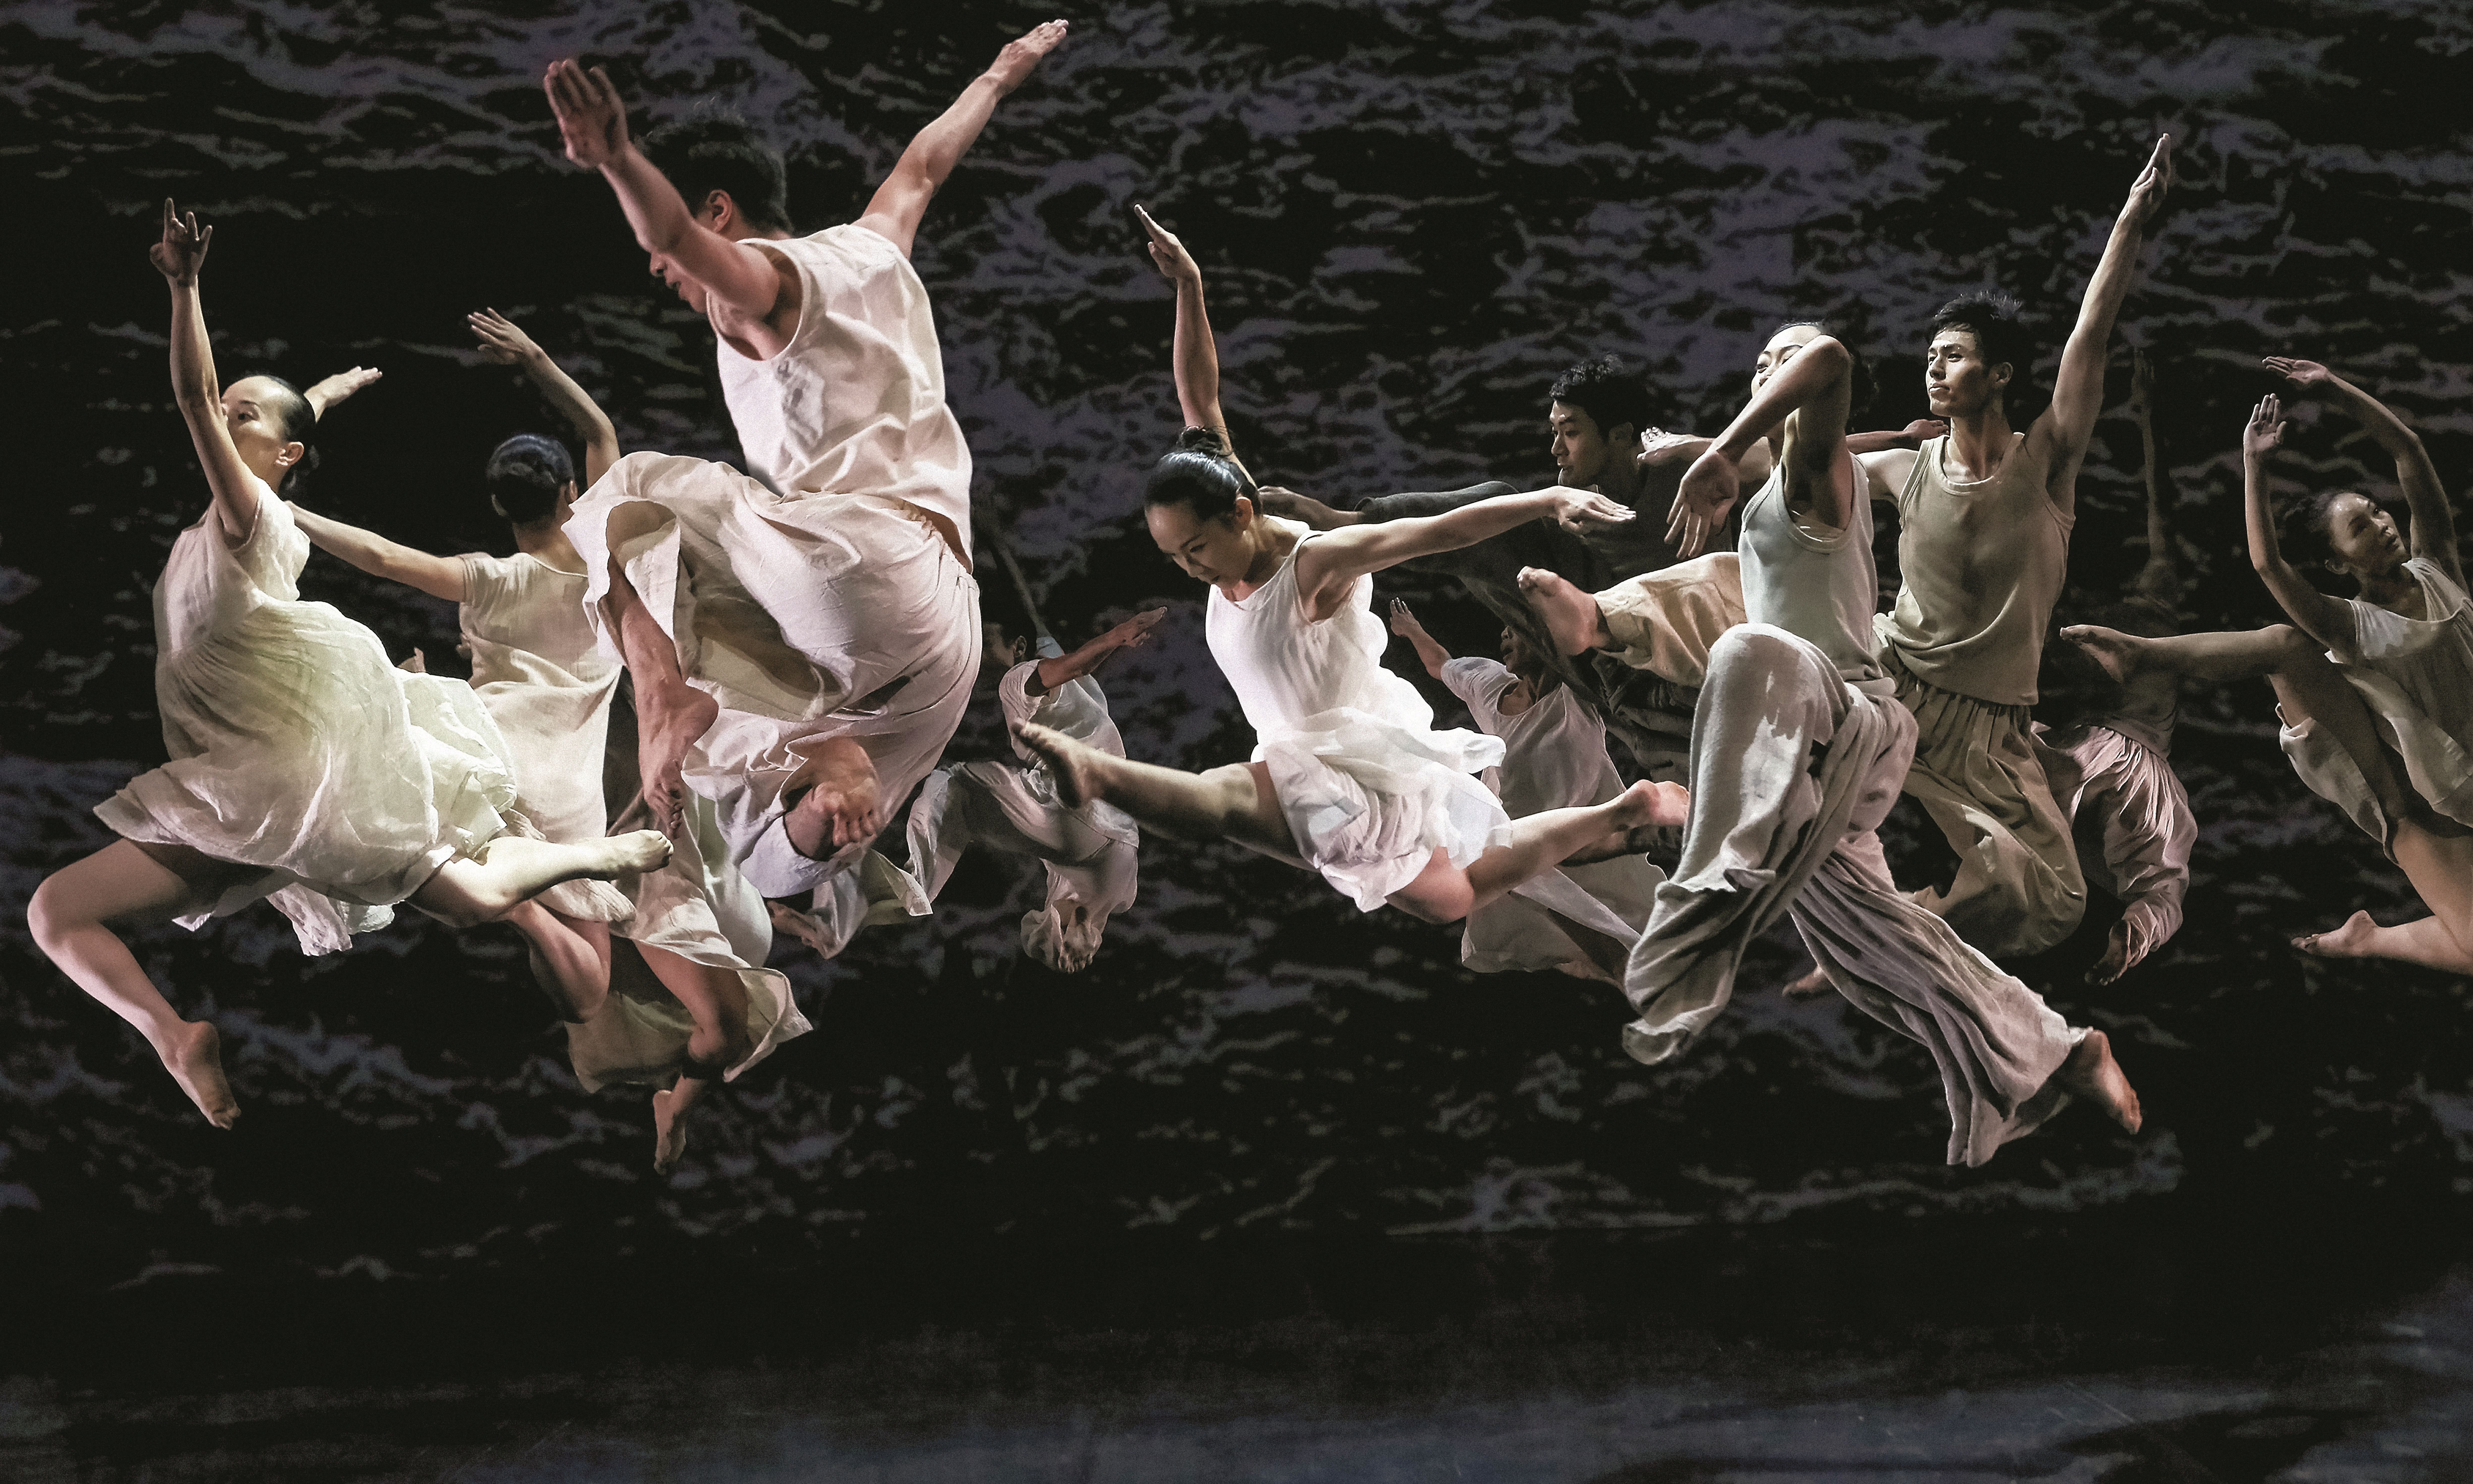 In 1973, choreographer Lin Hwai-min founded Cloud Gate Dance Theatre of Taiwan and has since transformed modern dance through his innovative choreography and with spellbinding shows such as ‘White Water’ (pictured). At the end of next year, Lin will step down as the company’s artistic director. An anniversary gala is scheduled for February in Hong Kong to honour this legend’s lifetime of achievements.